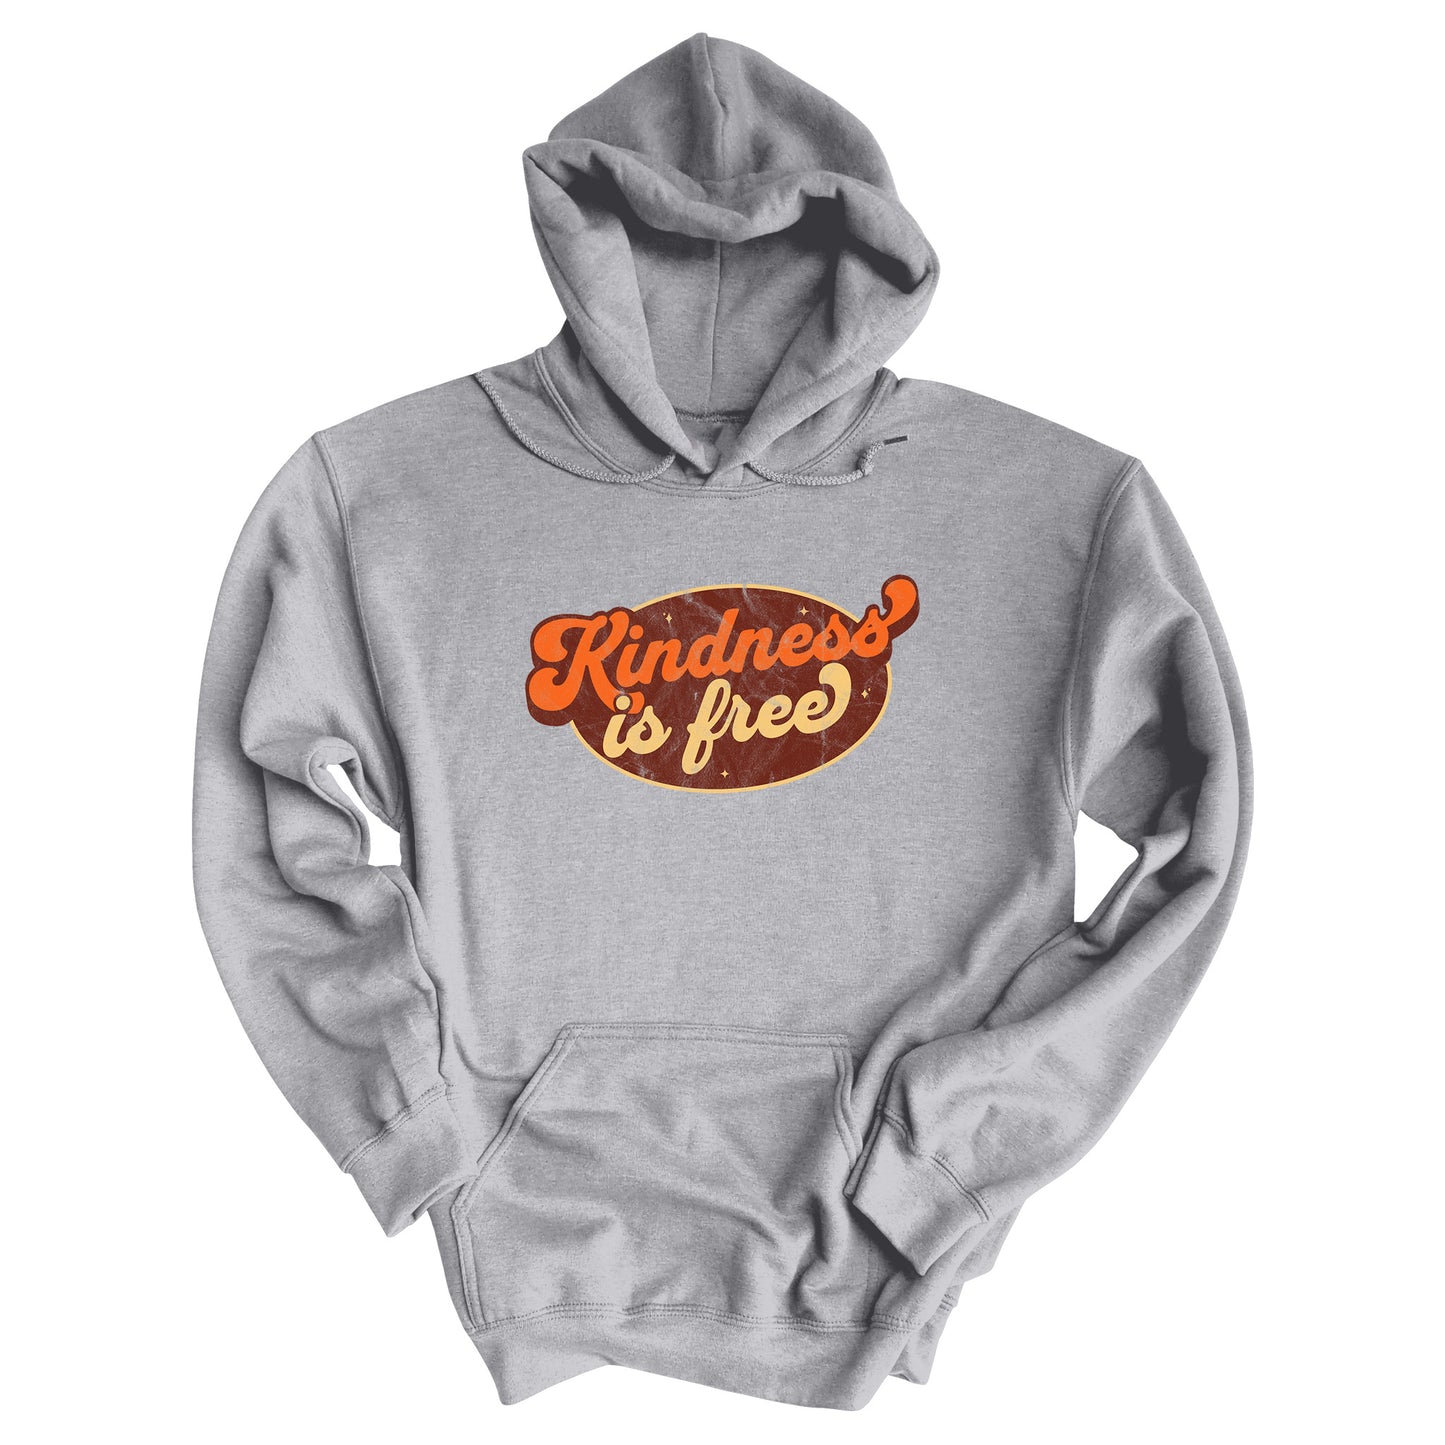 Sport Grey color unisex hoodie with a retro graphic that says “Kindness is free.” The text is in a script font with a brown oval behind it. The “k” and the “s” in the word “Kindness” are not contained inside the oval. The graphic is also distressed to add to the retro feel.